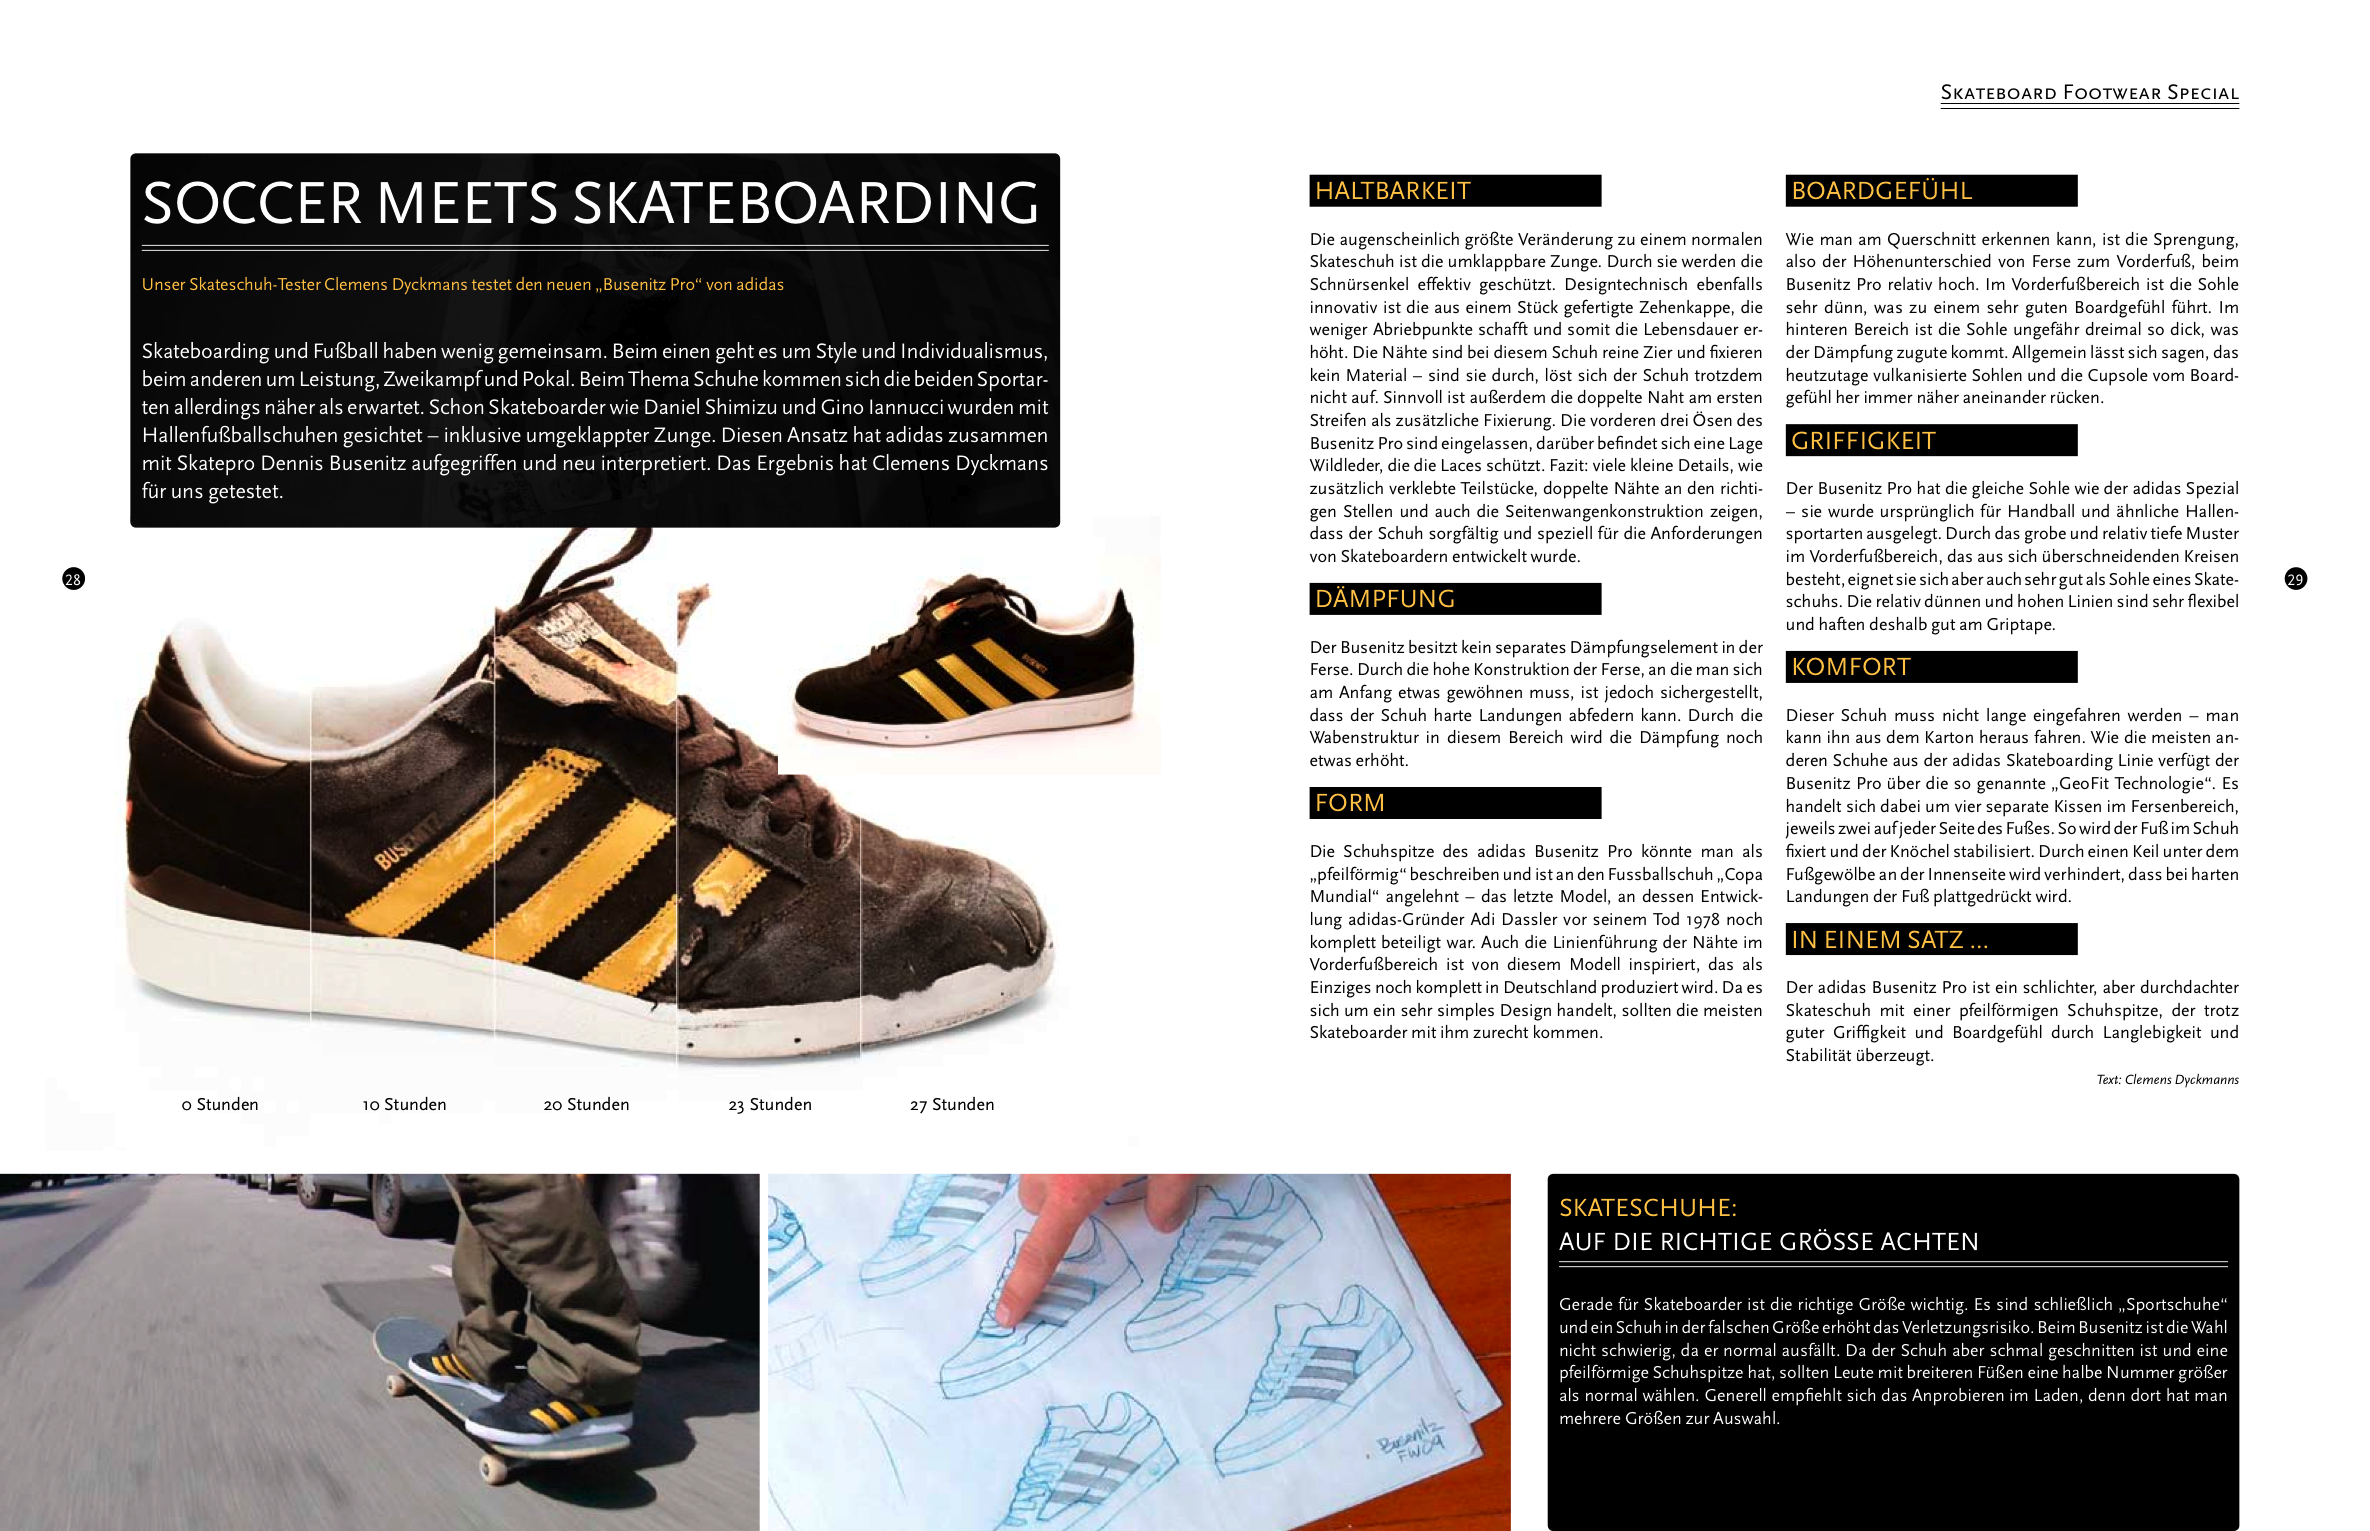 Sneakers Adidas Busenitz Pro article - Weartested detailed skate reviews